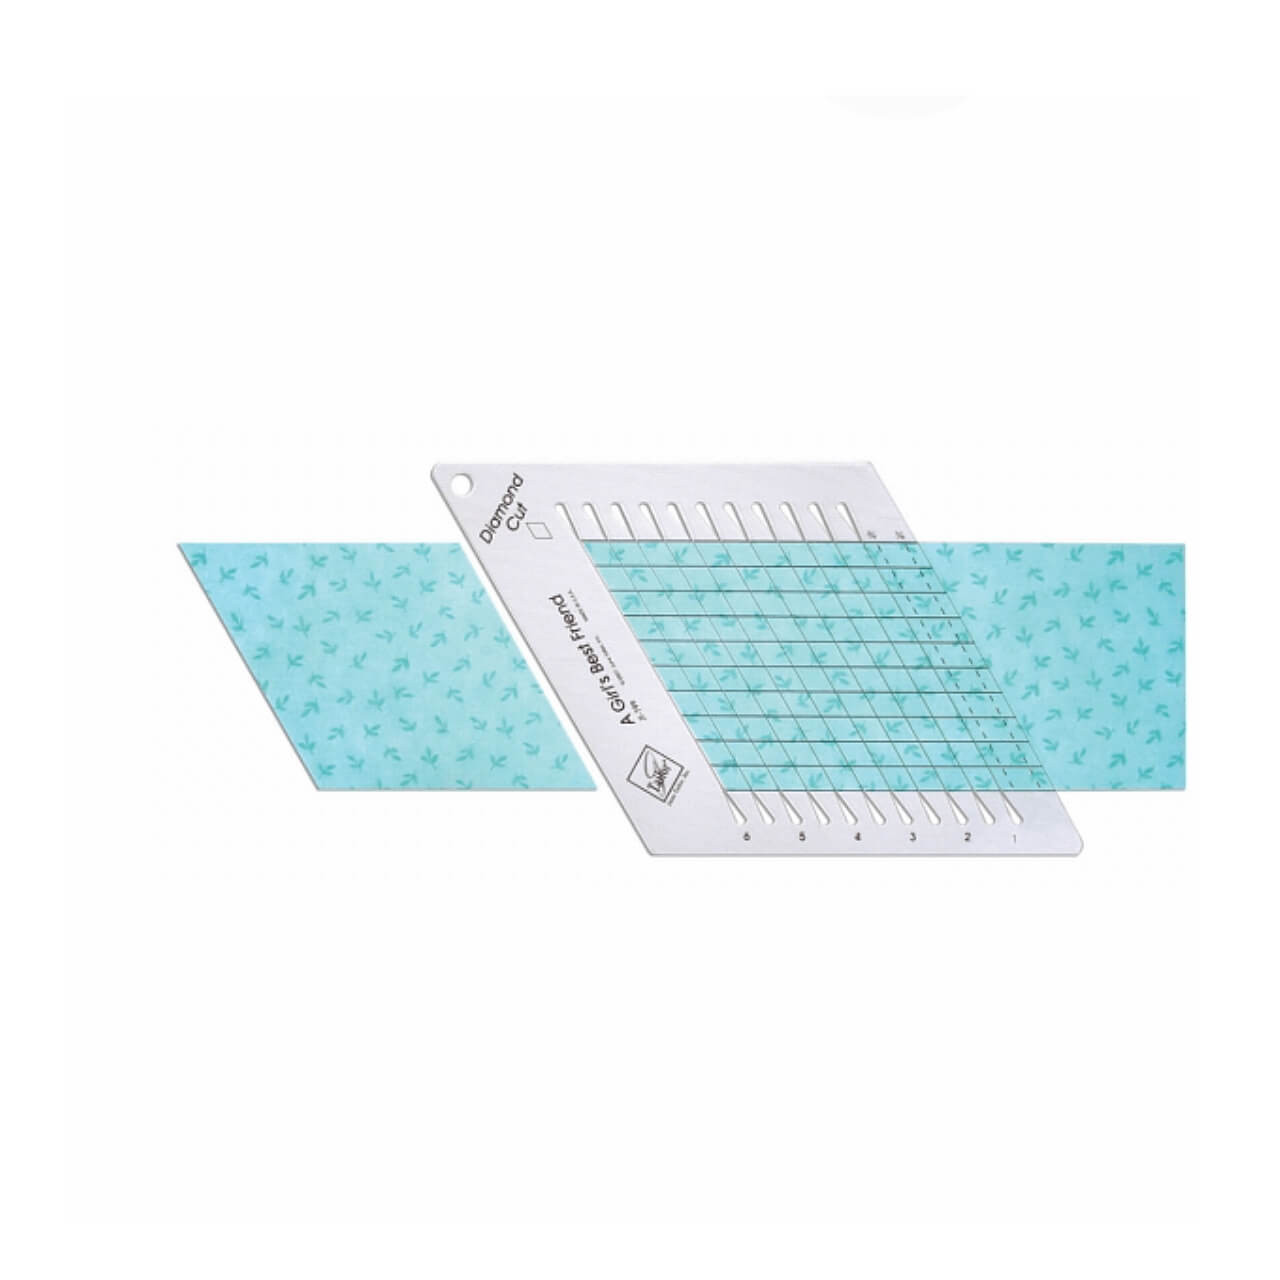 The June Tailor Diamond Cut Ruler is positioned on a light blue fabric with a bird pattern, illustrating the tool's use for cutting diamond shapes in quilting projects.